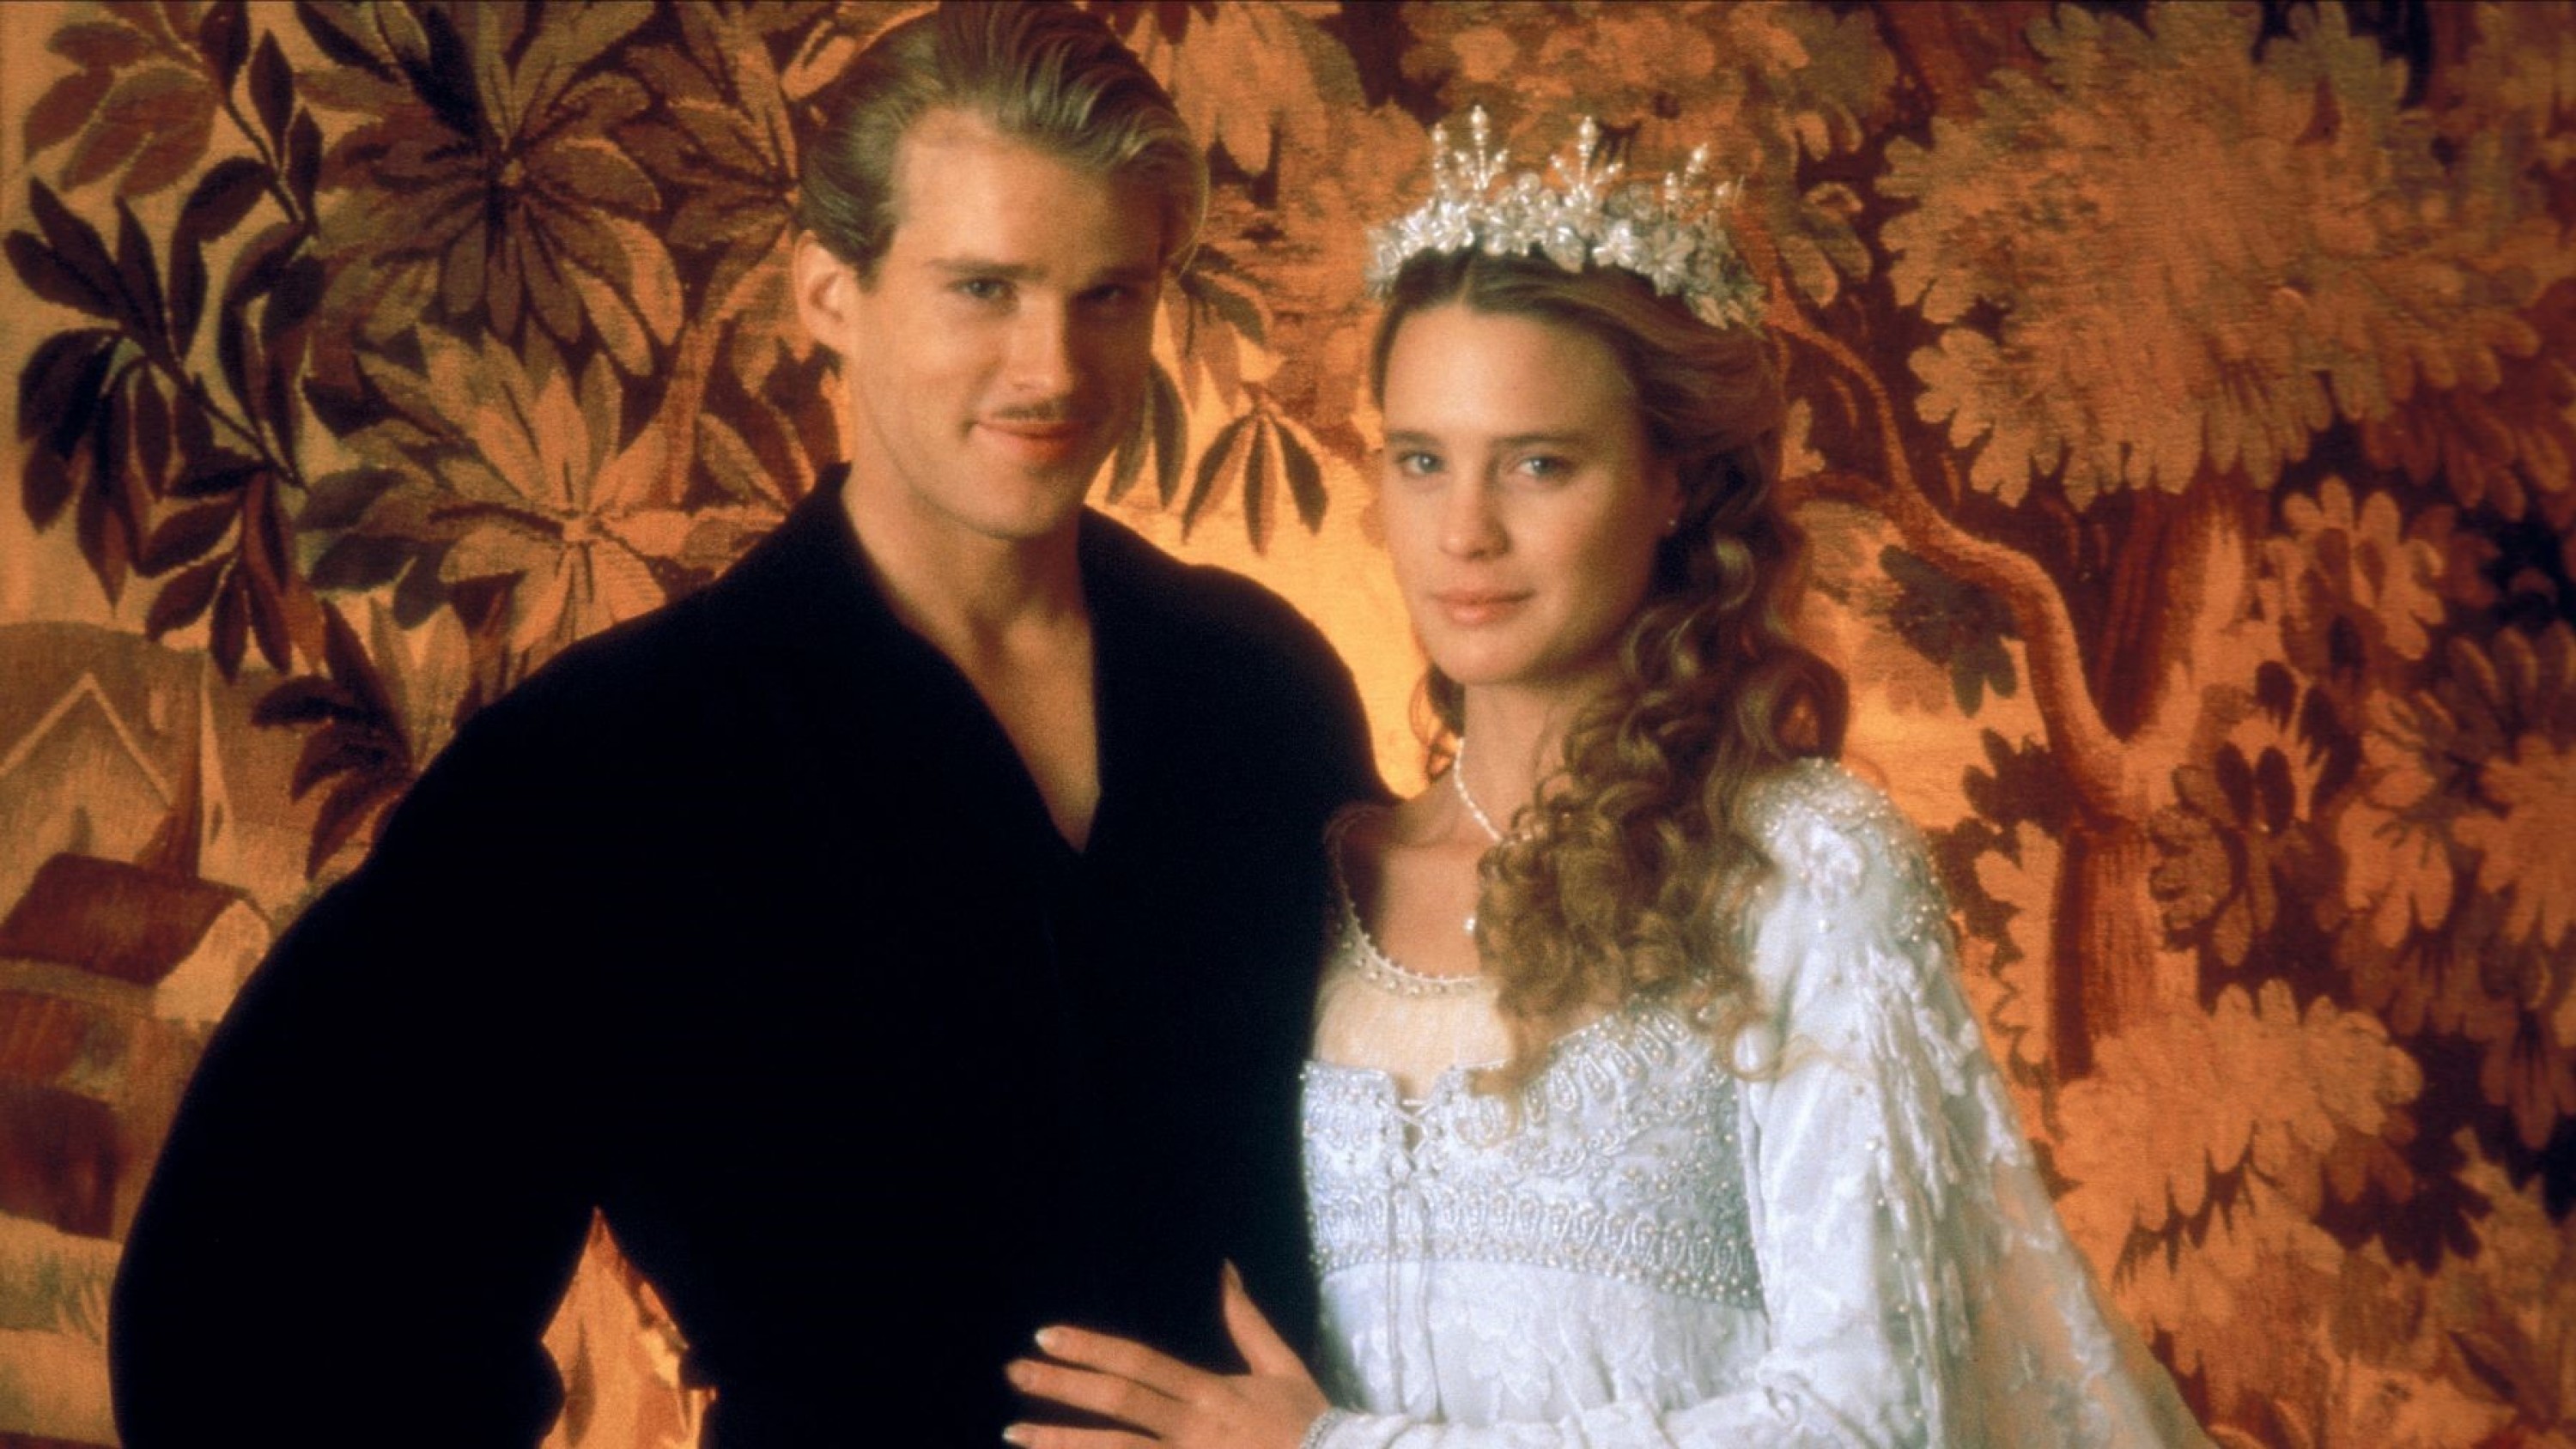 A film guide that looks at 'The Princess Bride' (1987) to explore narration